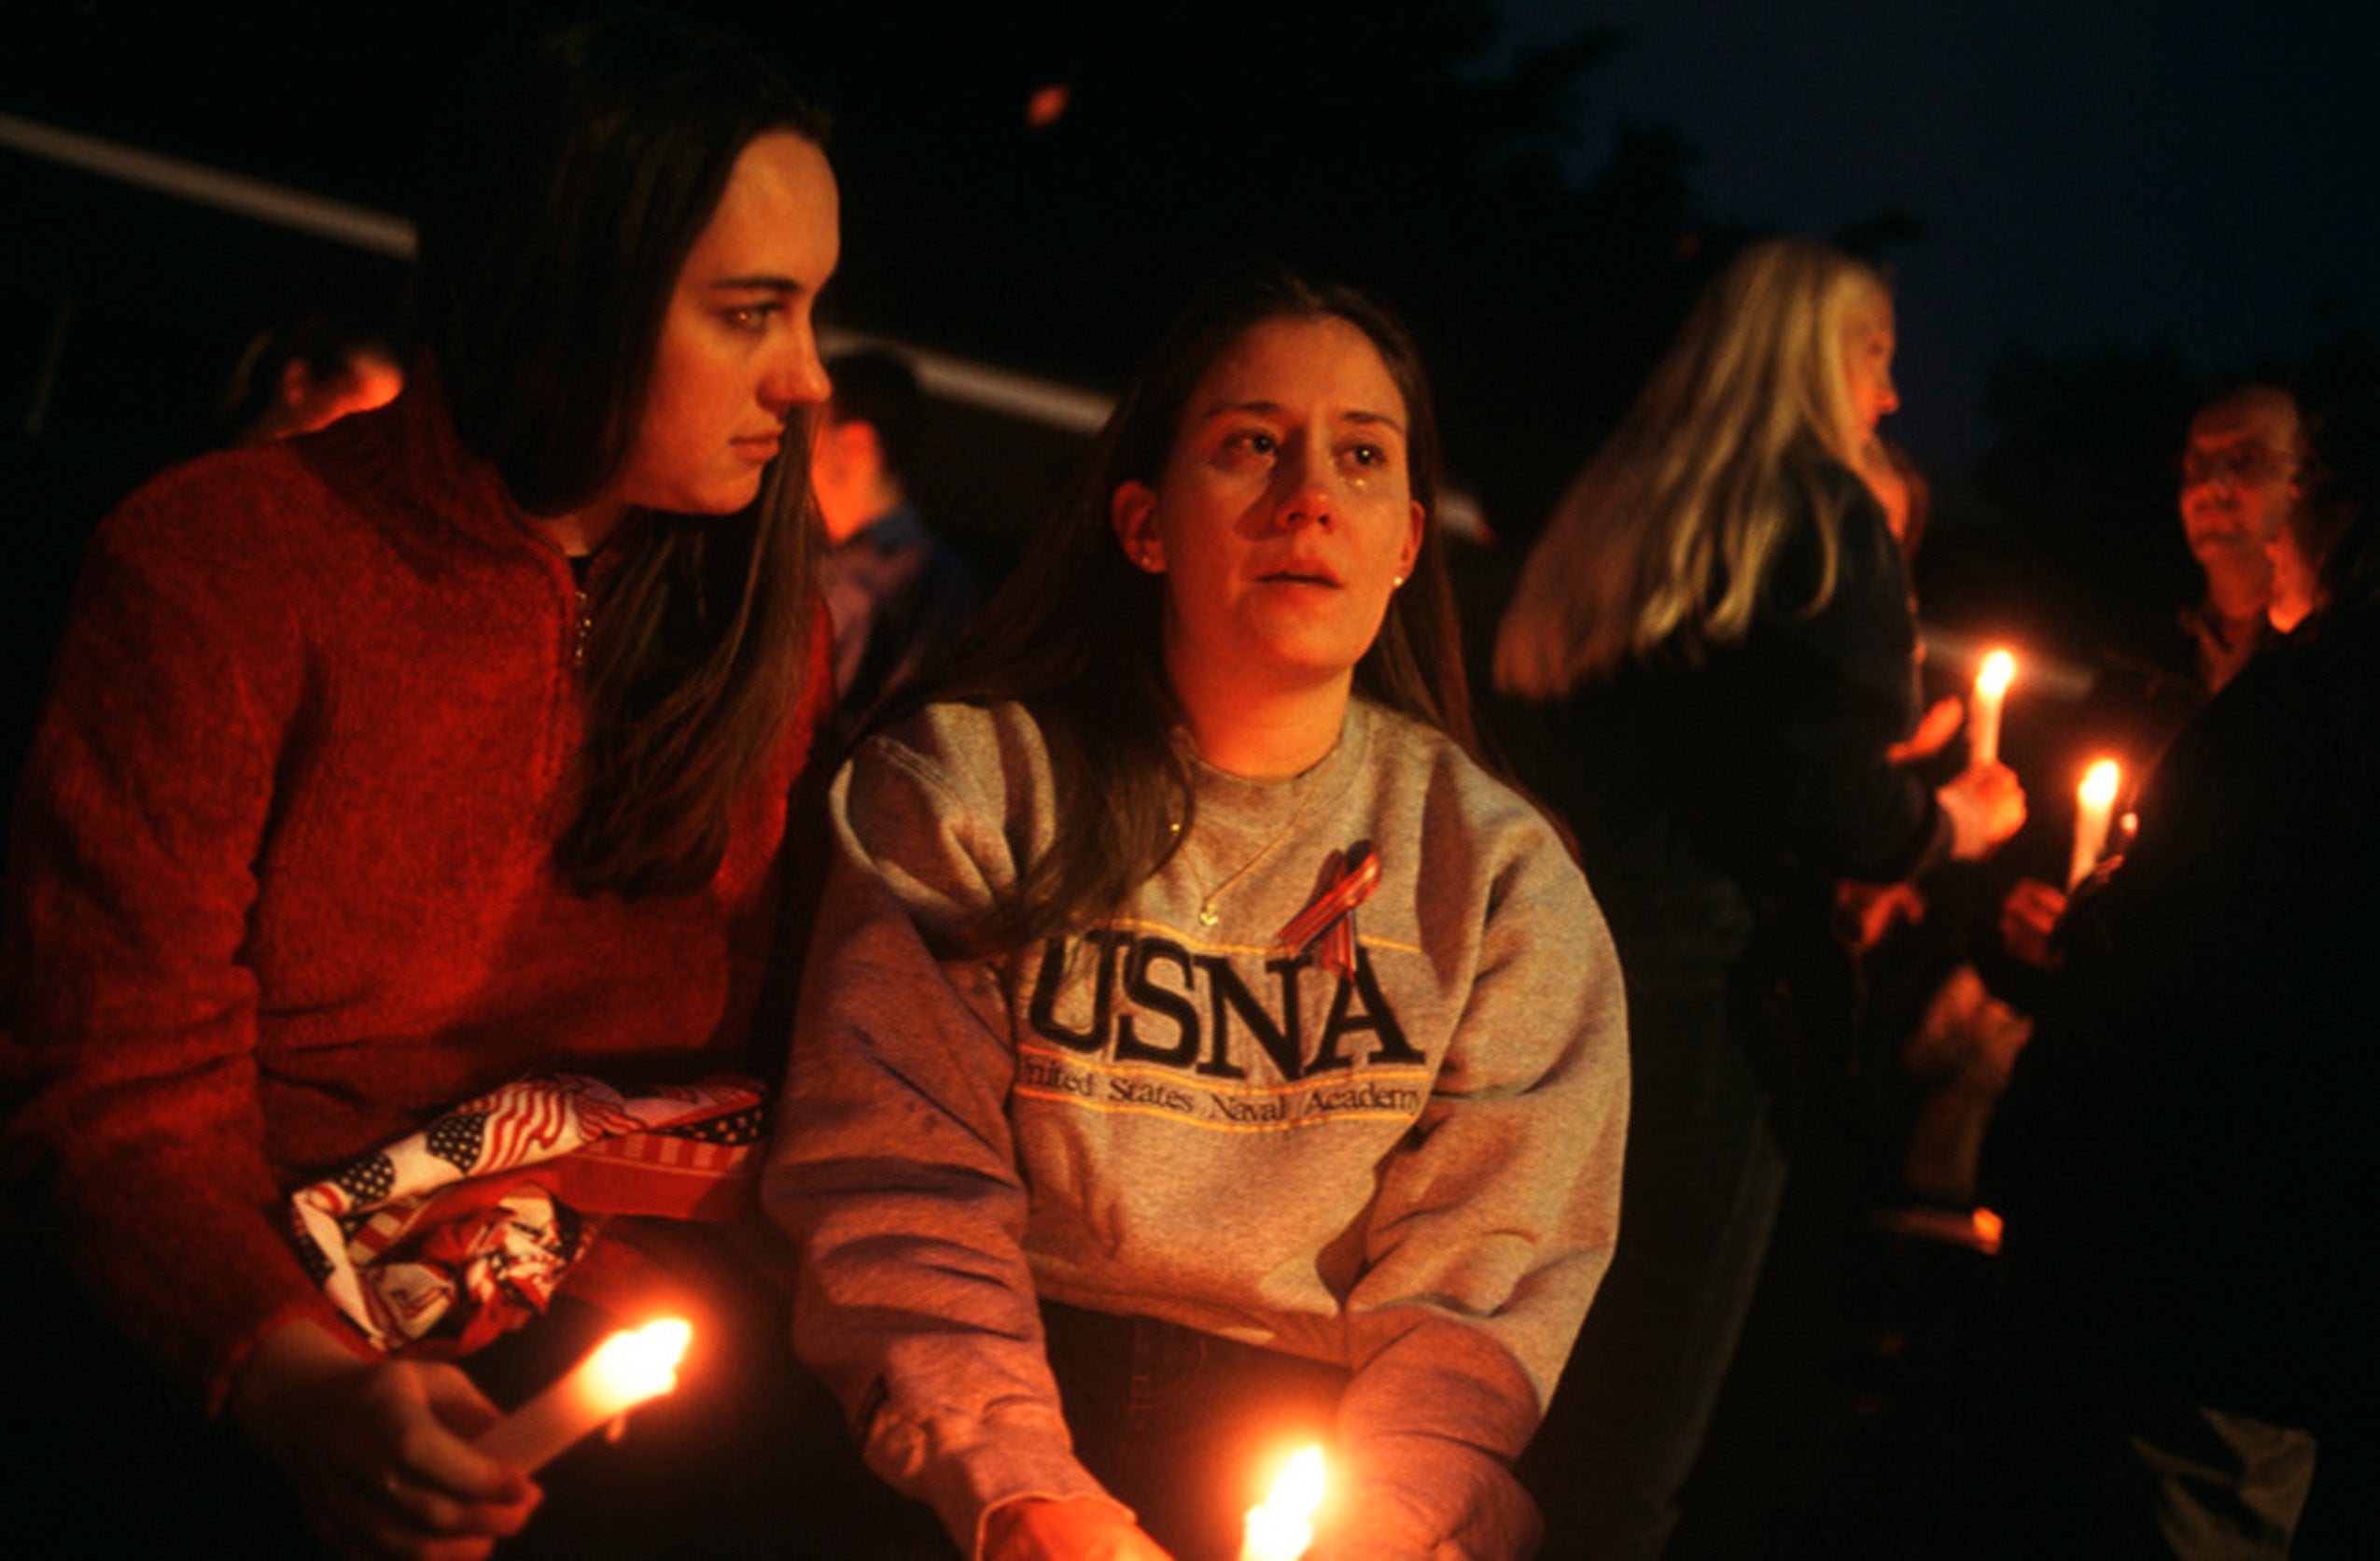 Two female students --one shedding tears—sit among members of the campus community holding lit candles at night